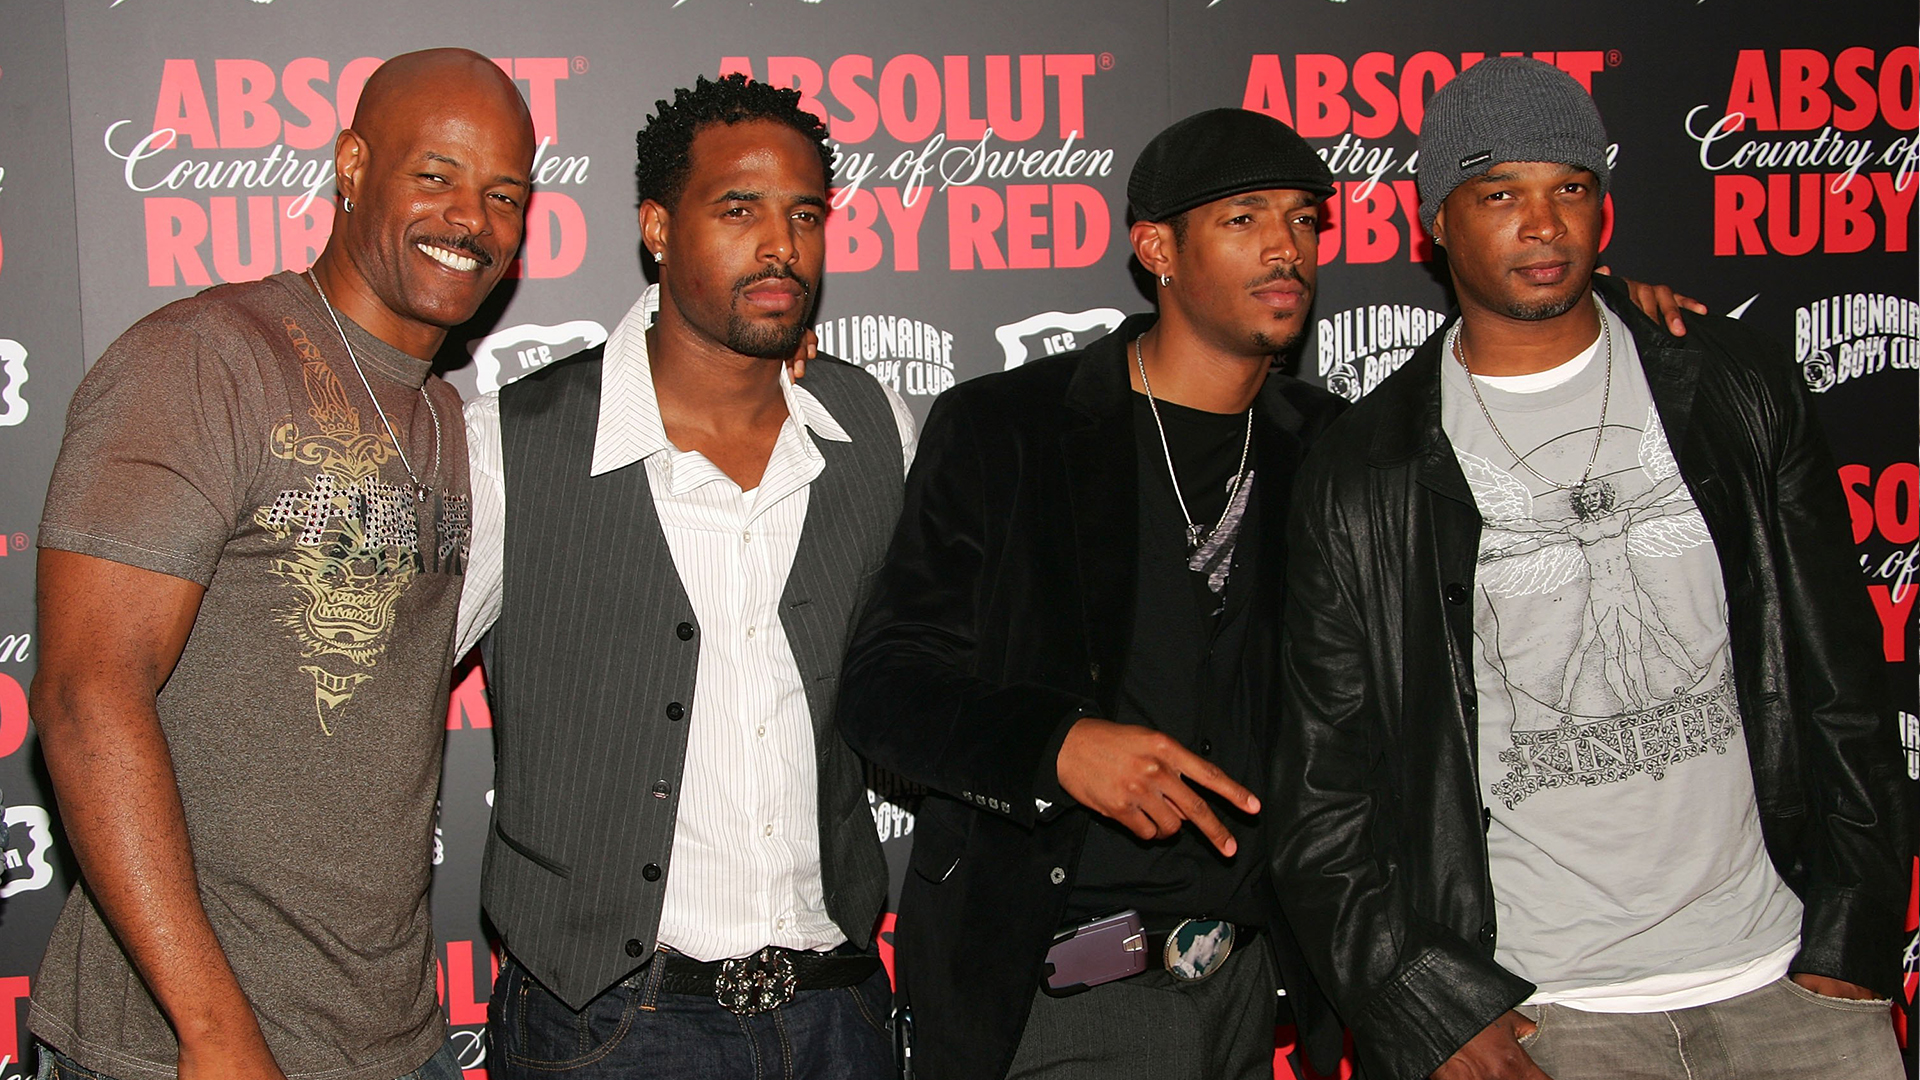 How The Next Generation Of The Wayans Family Are Building On Their Family's $300M Empire